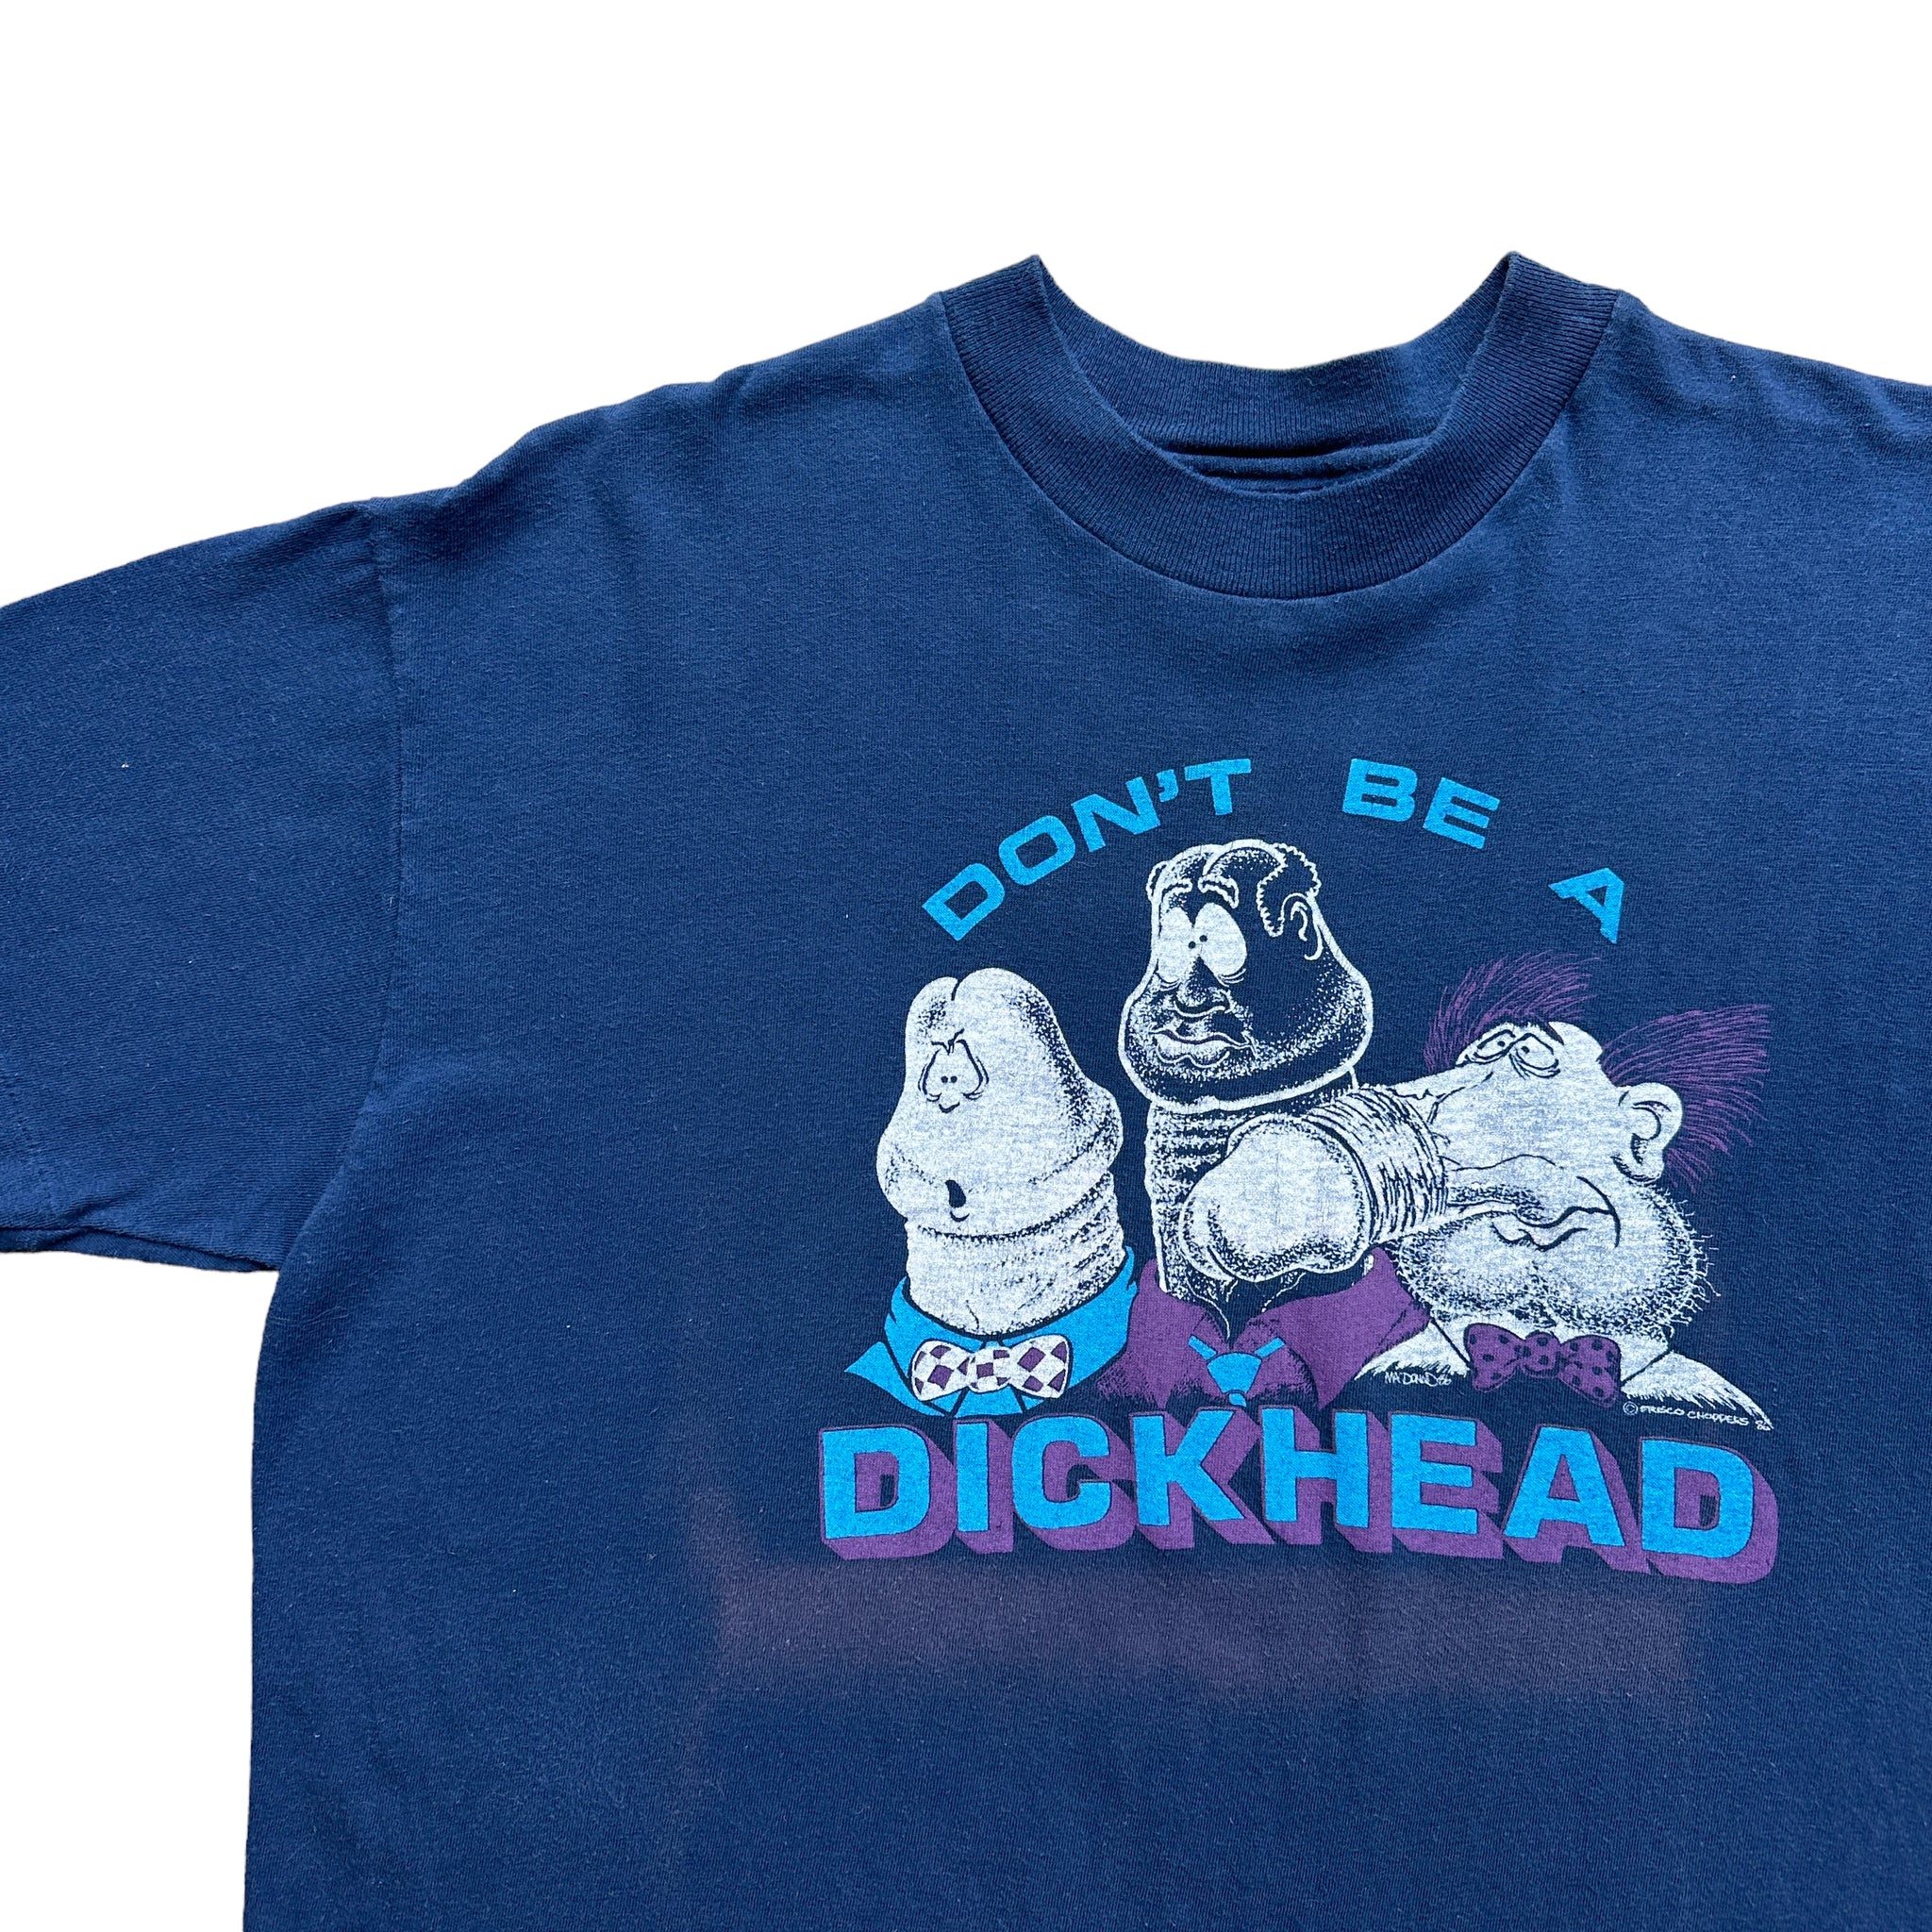 80s Don’t be a dickhead tee large fit